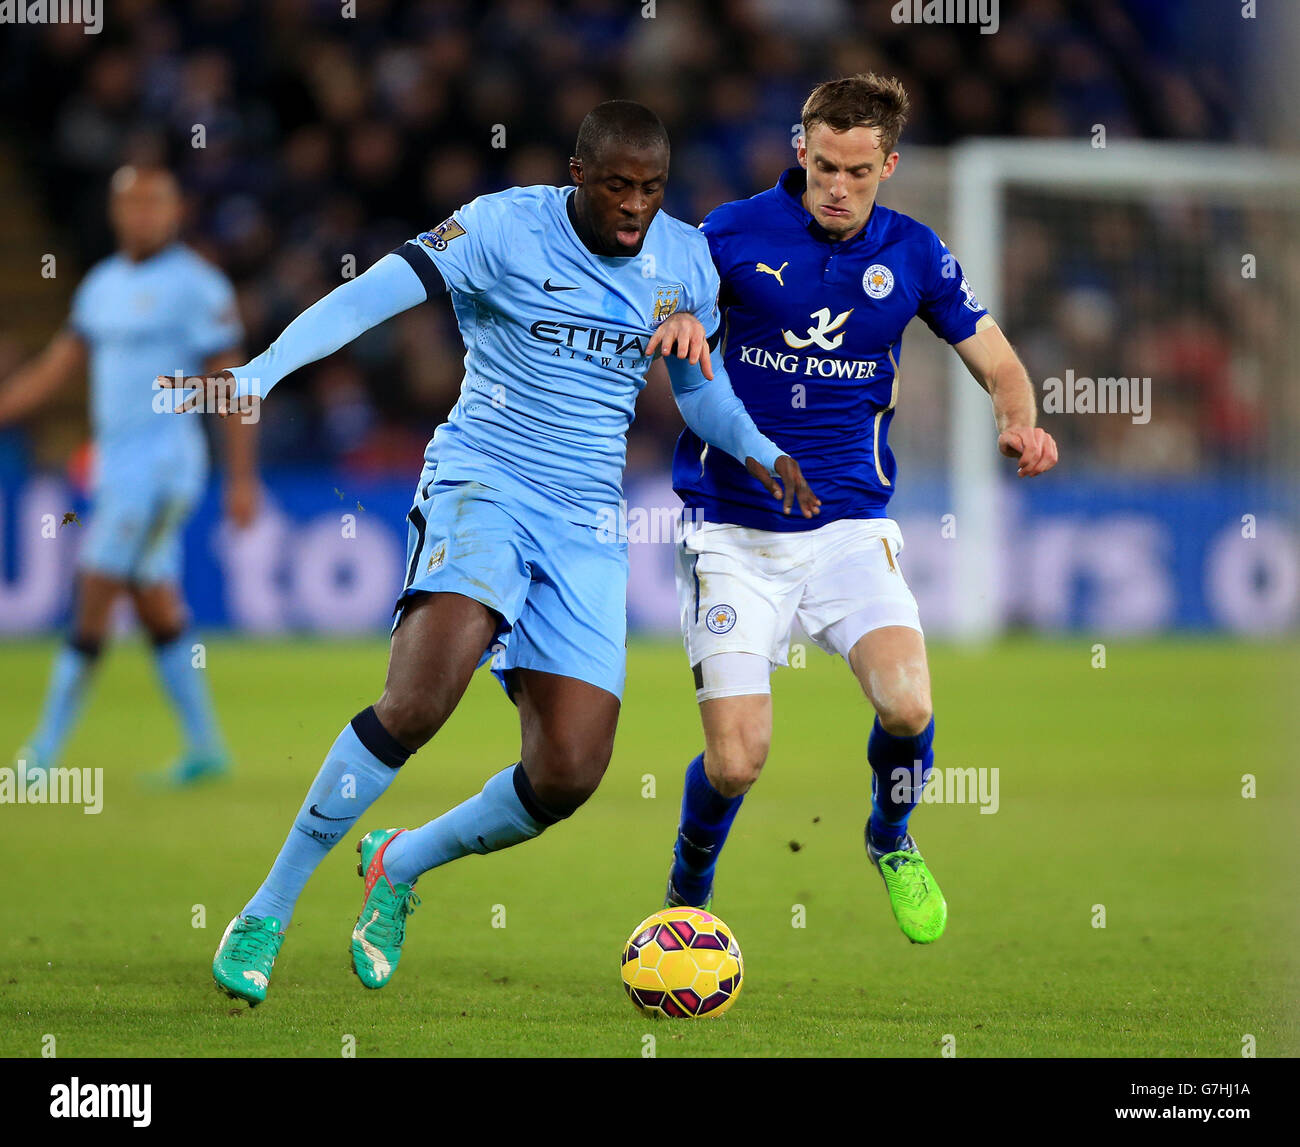 Manchester City's Yaya Toure (left) and Leicester City's Andy King battle for the ball during the Barclays Premier League match at the King Power Stadium, Leicester. PRESS ASSOCIATION Photo. Picture date: Saturday December 13, 2014. See PA story SOCCER Leicester. Photo credit should read Nick Potts/PA Wire. Maximum 45 images during a match. No video emulation or promotion as 'live'. No use in games, competitions, merchandise, betting or single club/player services. No use with unofficial audio, video, data, fixtures or club/league logos. Stock Photo